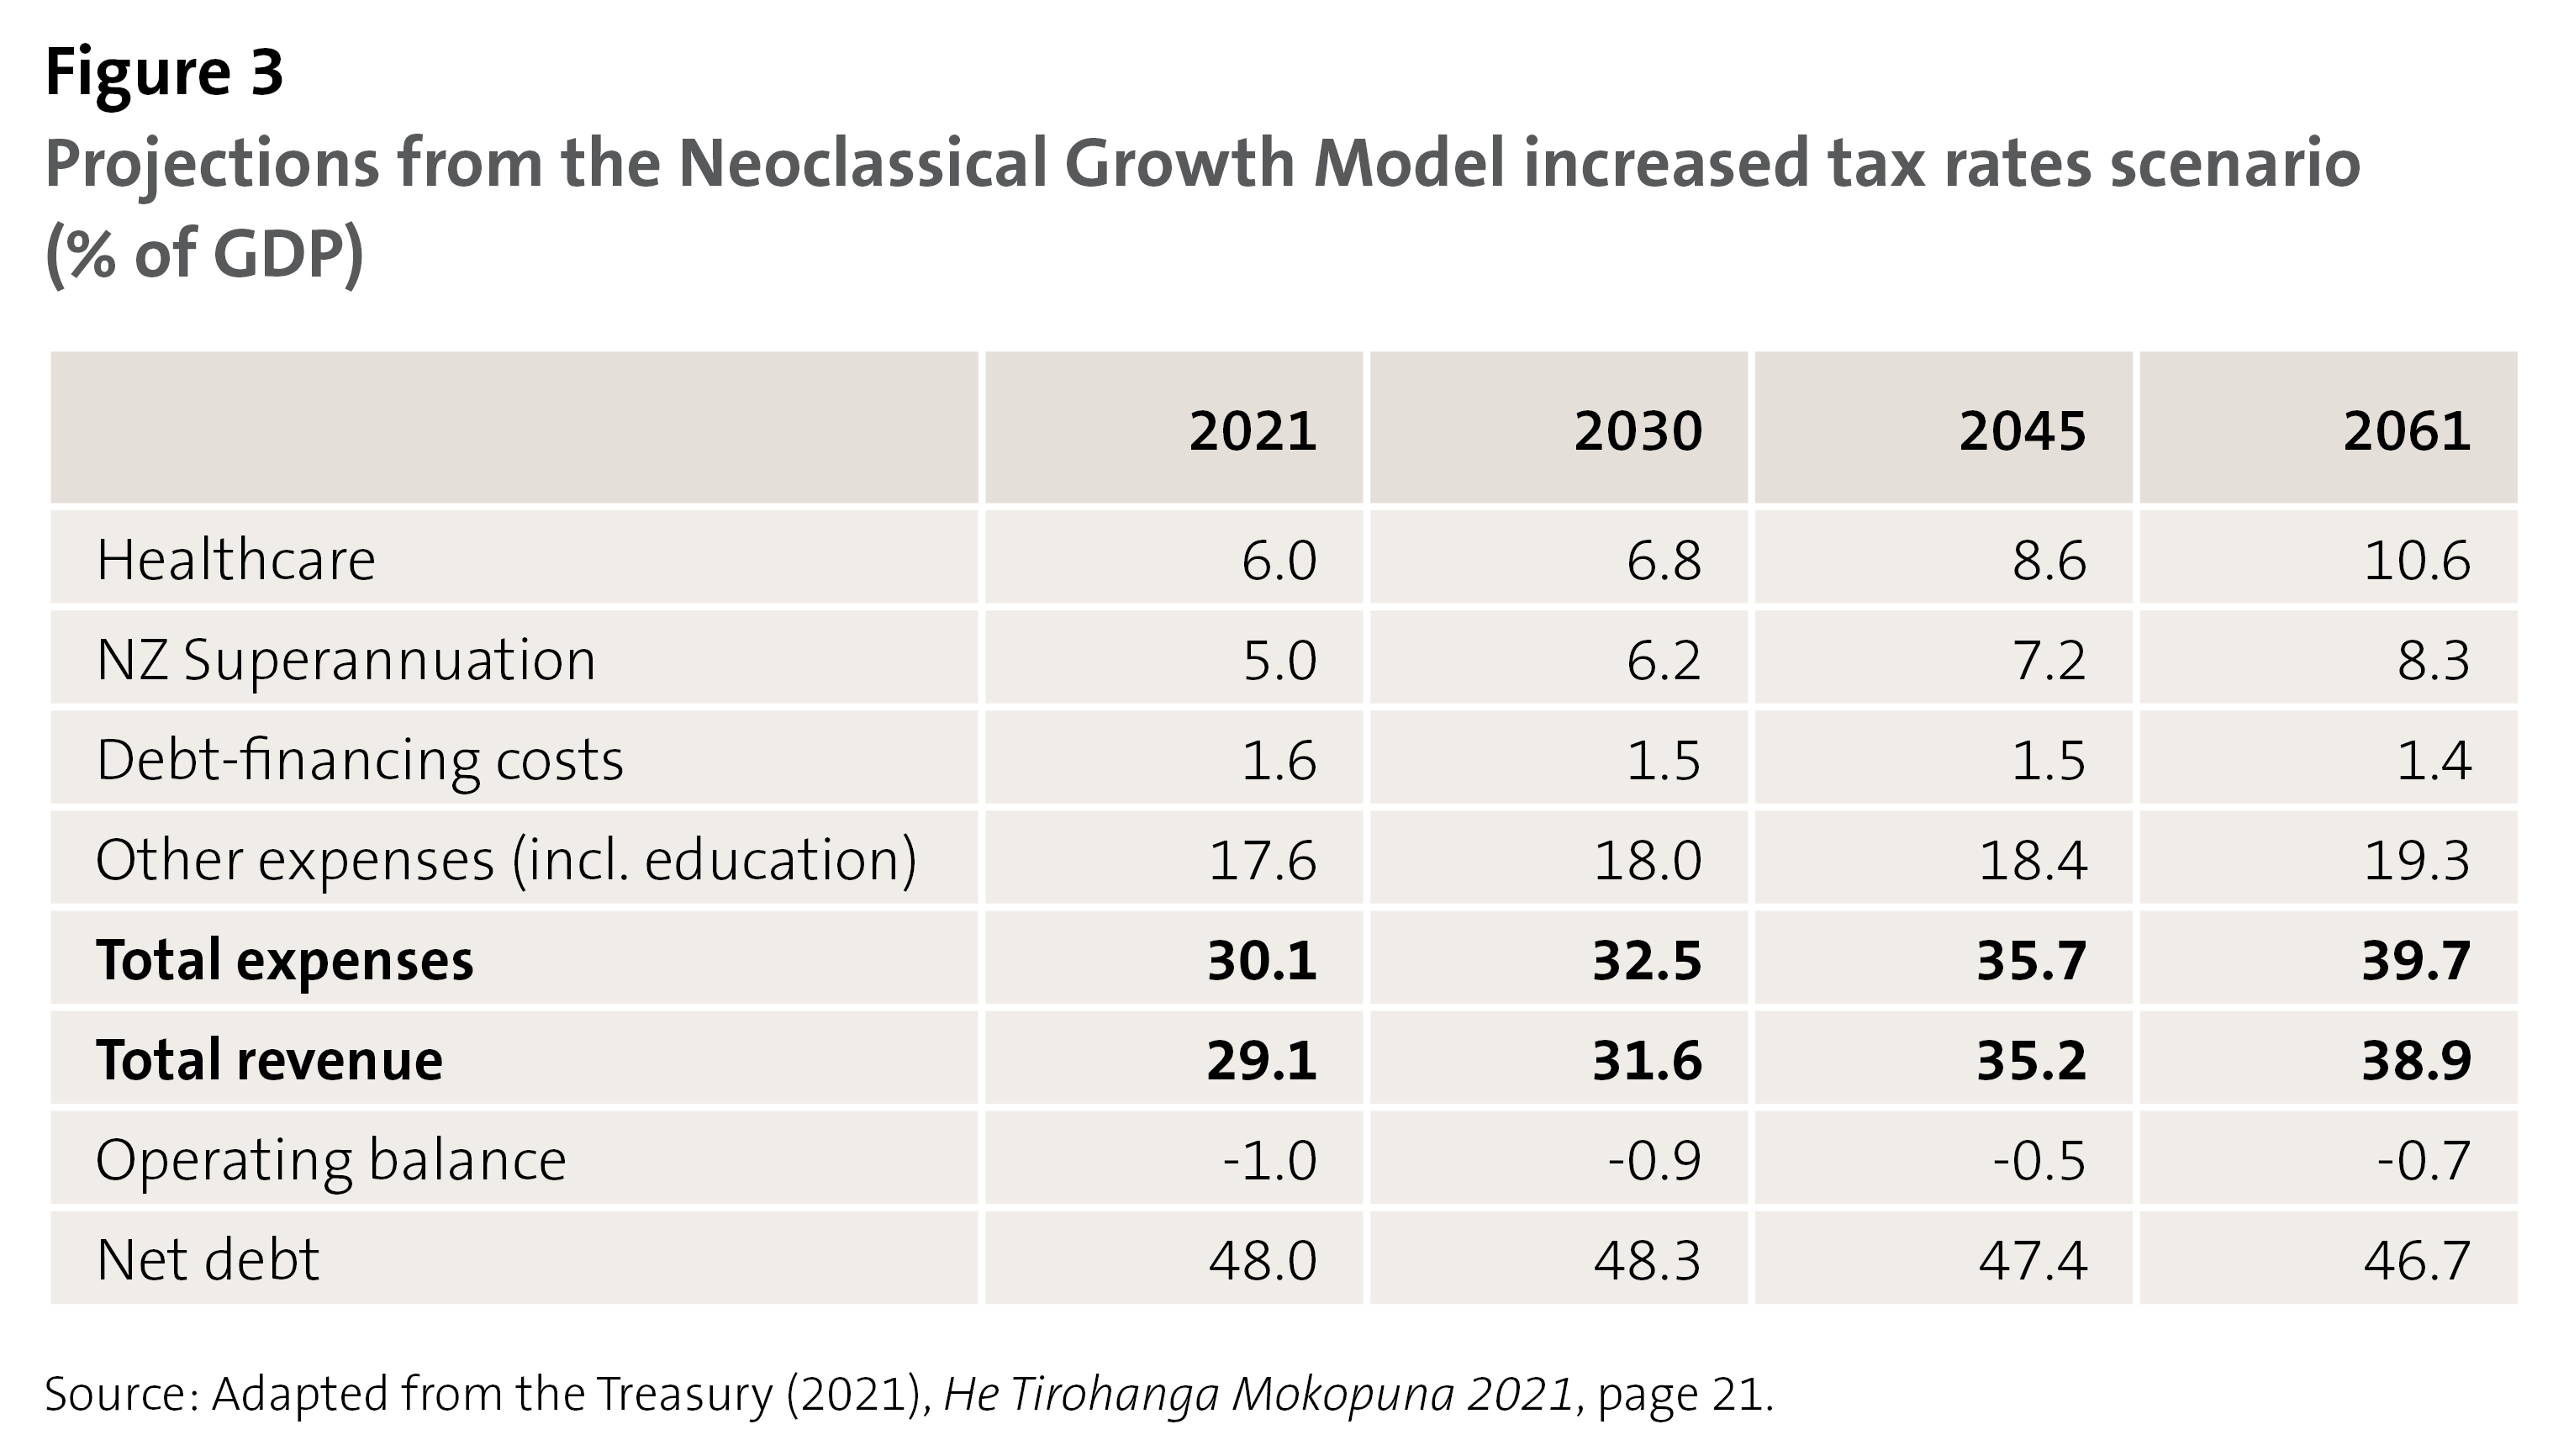 Figure 3: Projections from the Neoclassical Growth Model increased tax rates scenario (% of GDP)